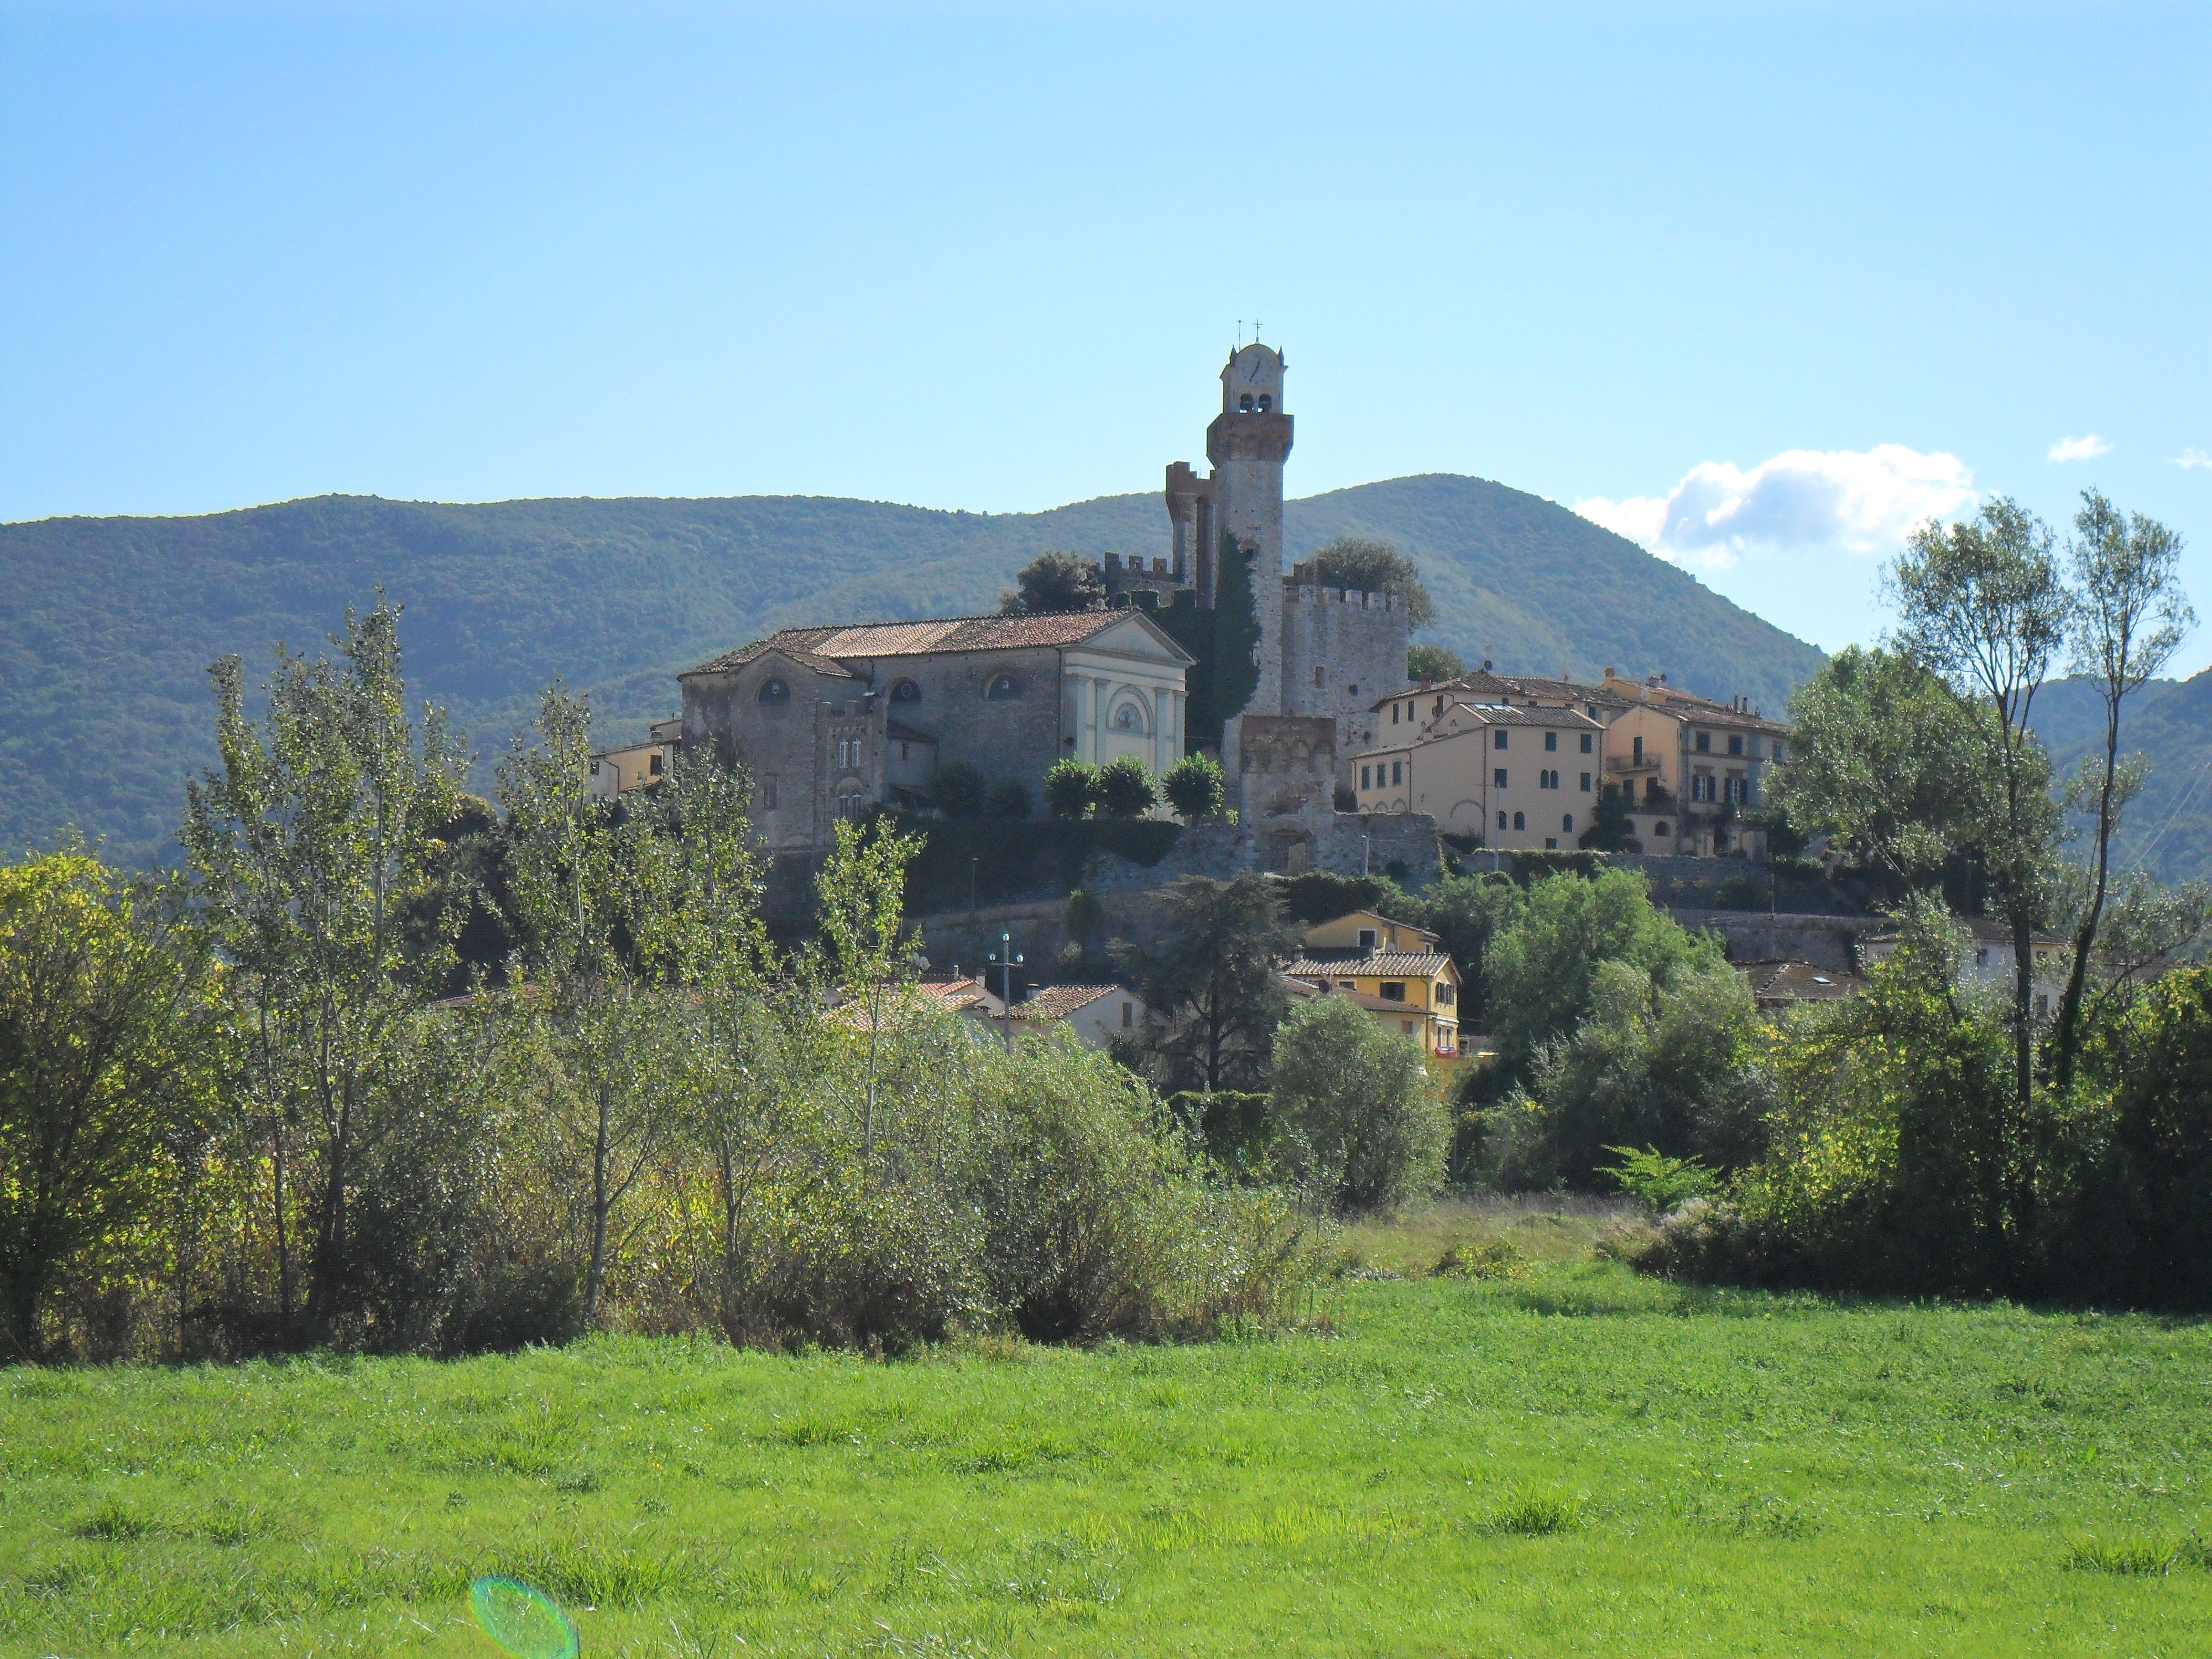 A hiltop village in Tuscany